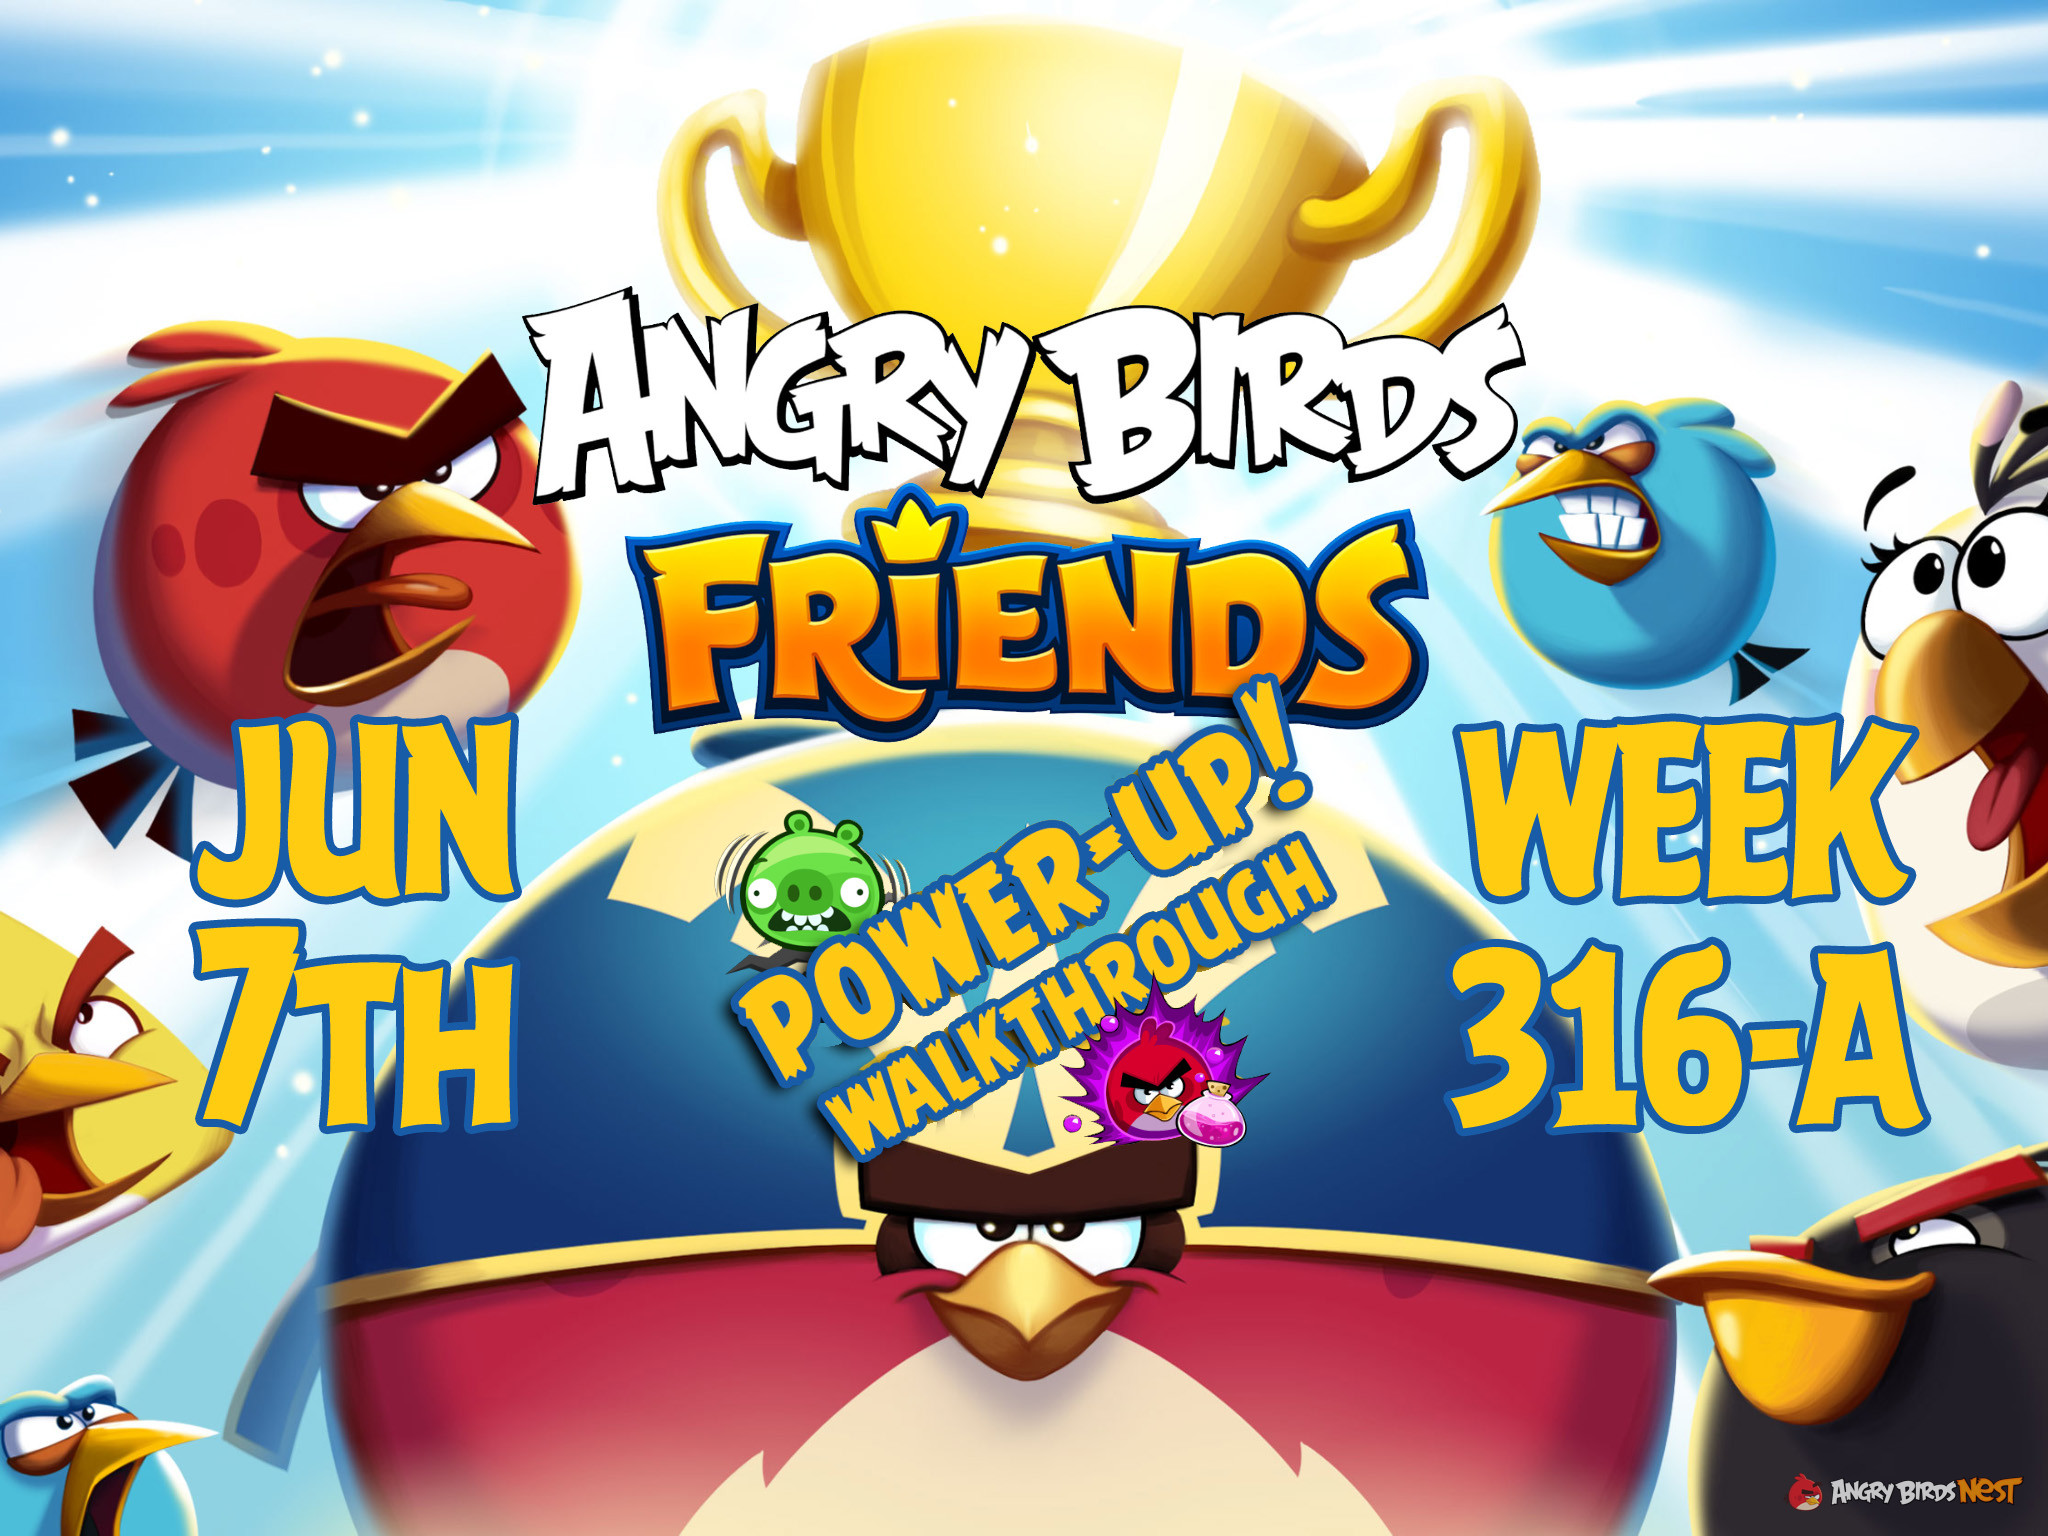 Angry-Birds-Friends-Tournament-Week-316-A-Feature-Image-PU